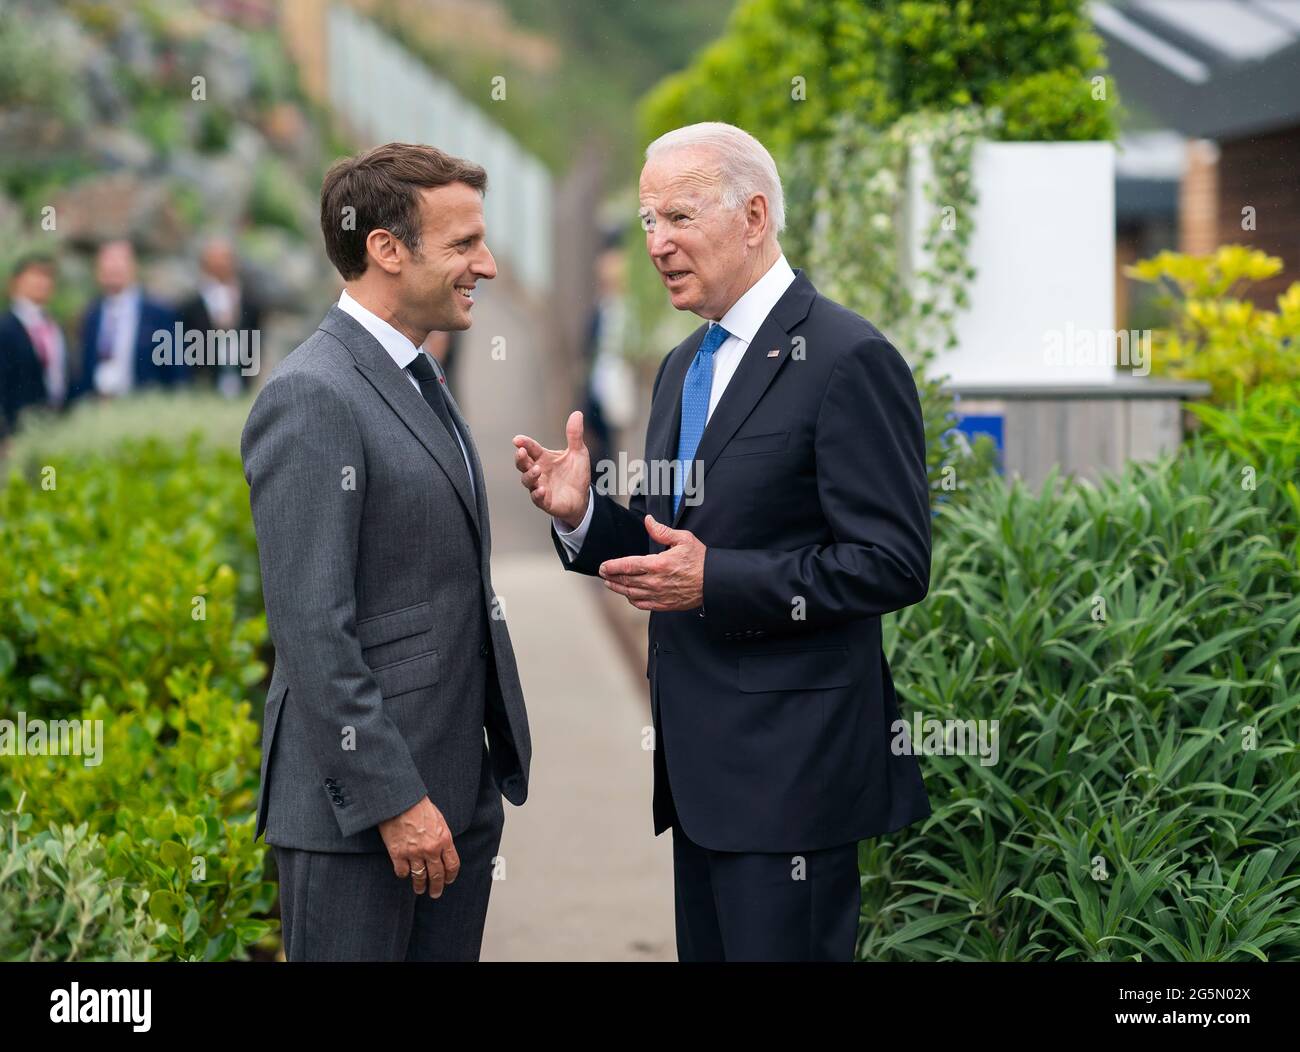 President Joe Biden and French President Emmanuel Macron talk prior to the first session of the G7 Summit on Friday, June 11, 2021, at the Carbis Bay Hotel and Estate in St. Ives, Cornwall, England. (Official White House Photo by Adam Schultz) Stock Photo